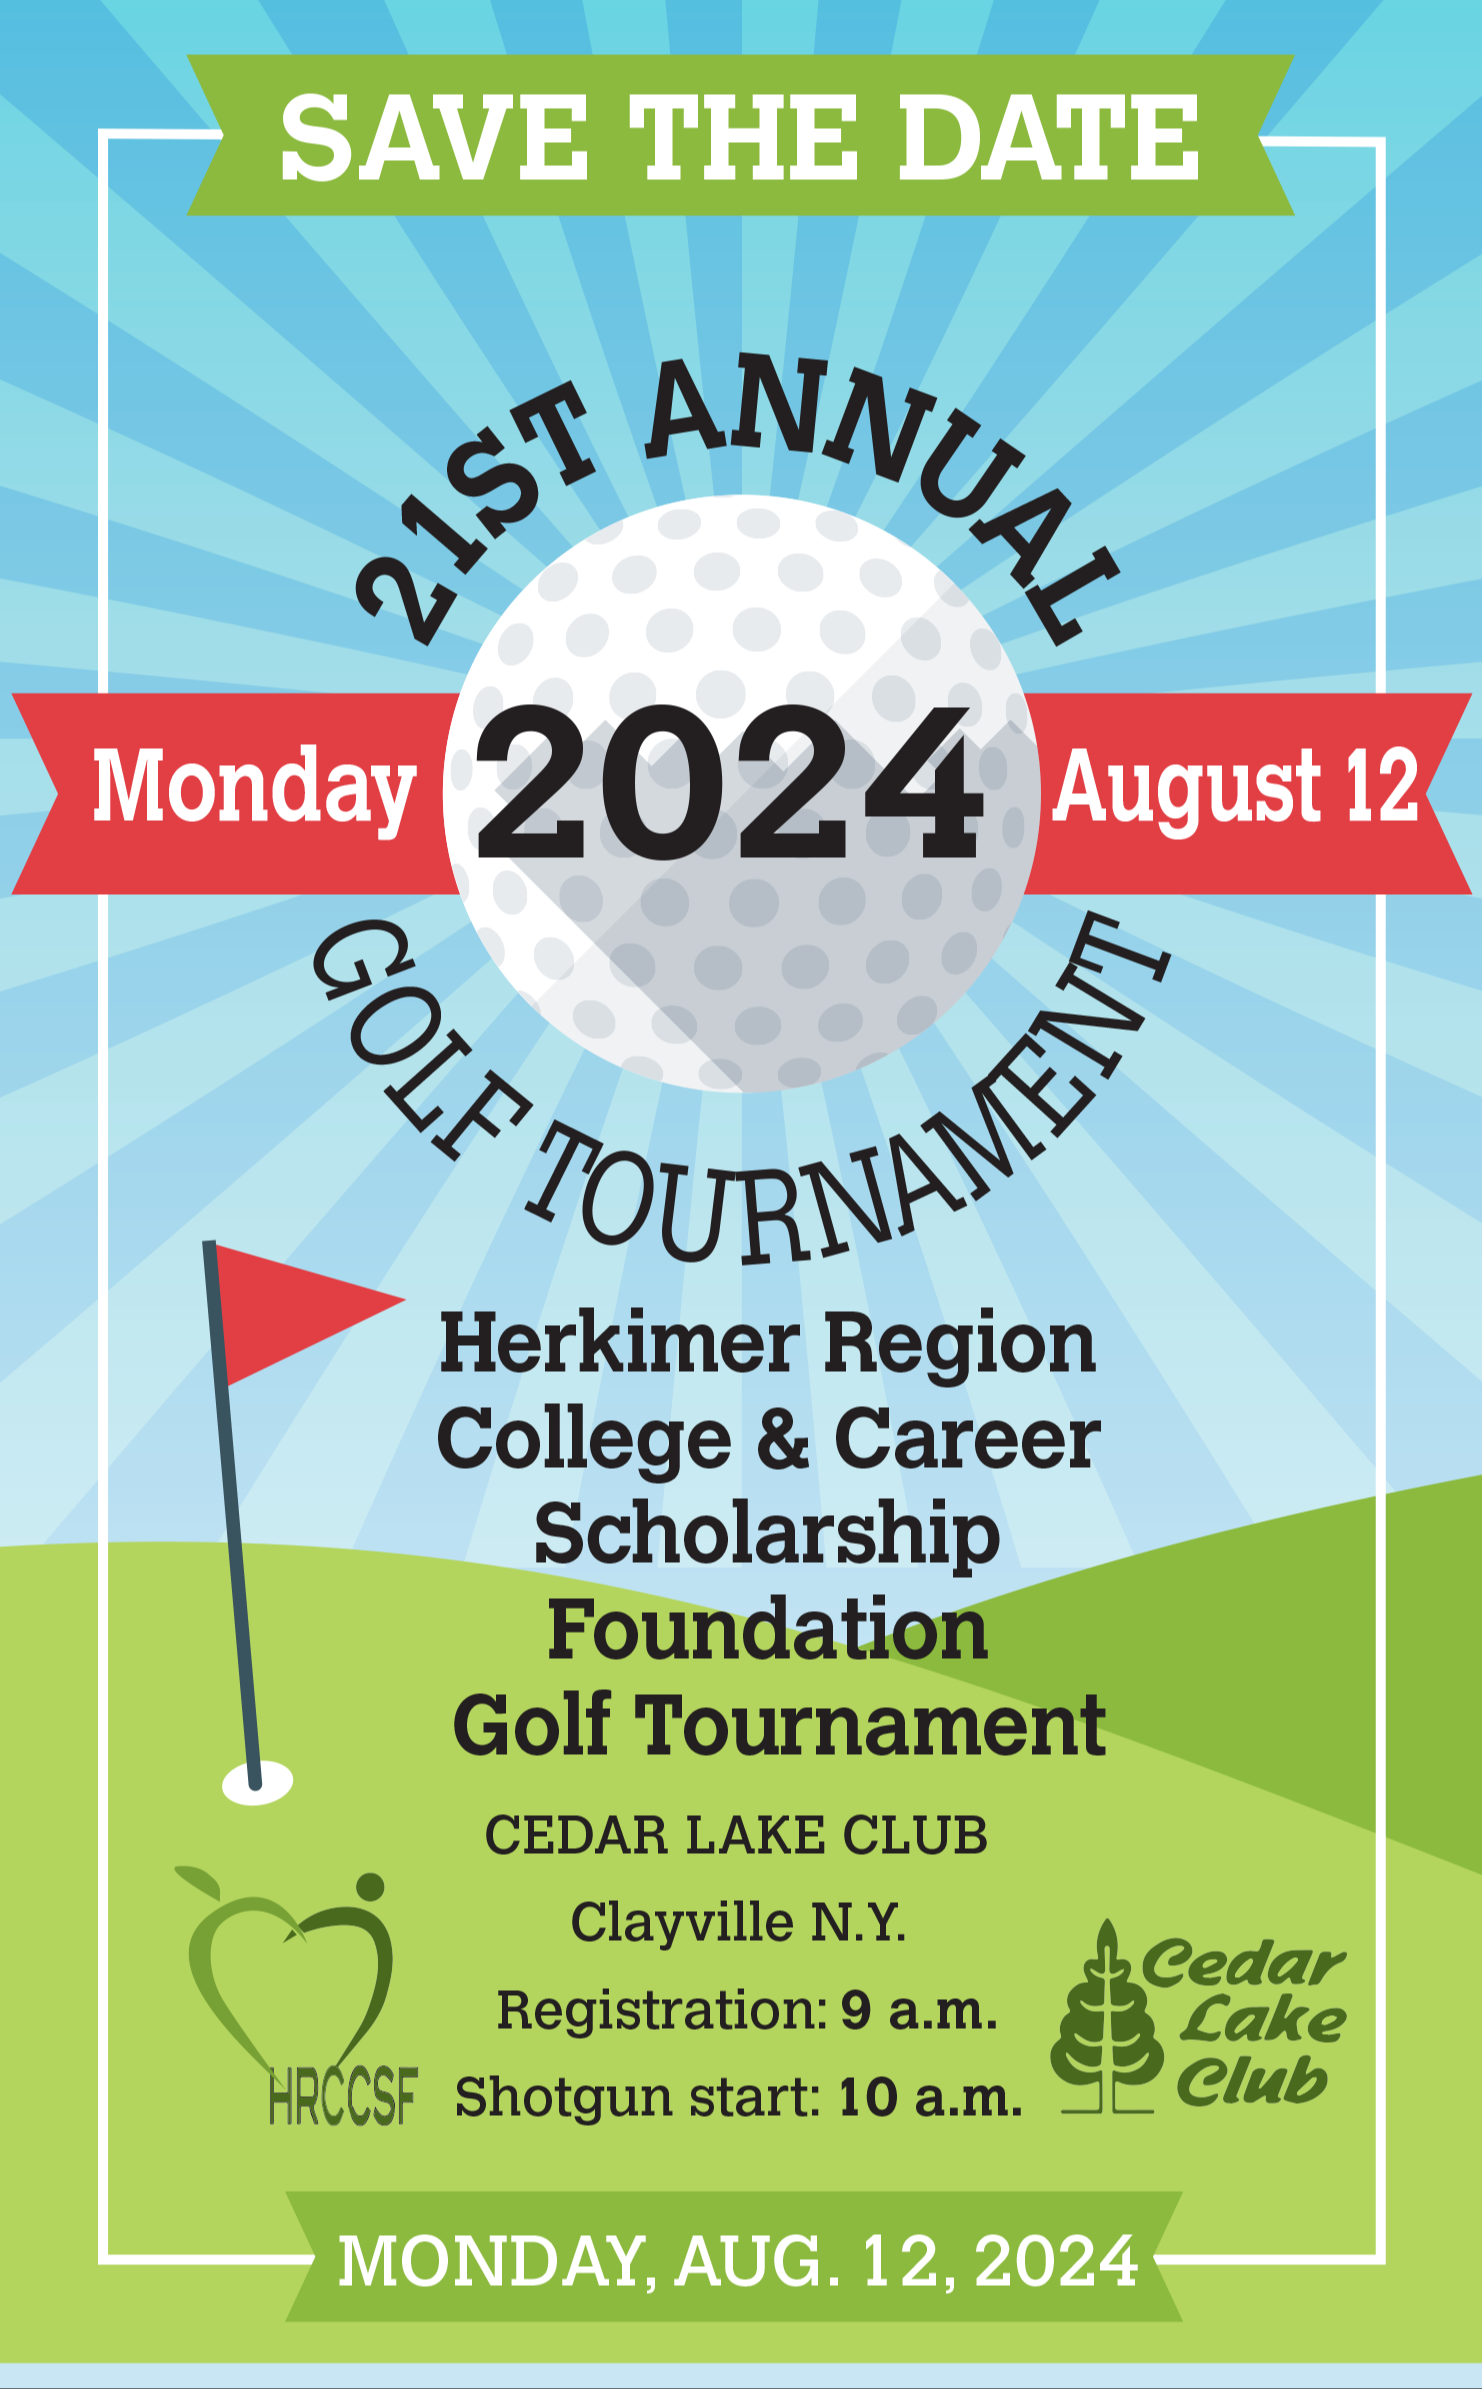 2023 Golf Tournament Save the Date for August 14 2023